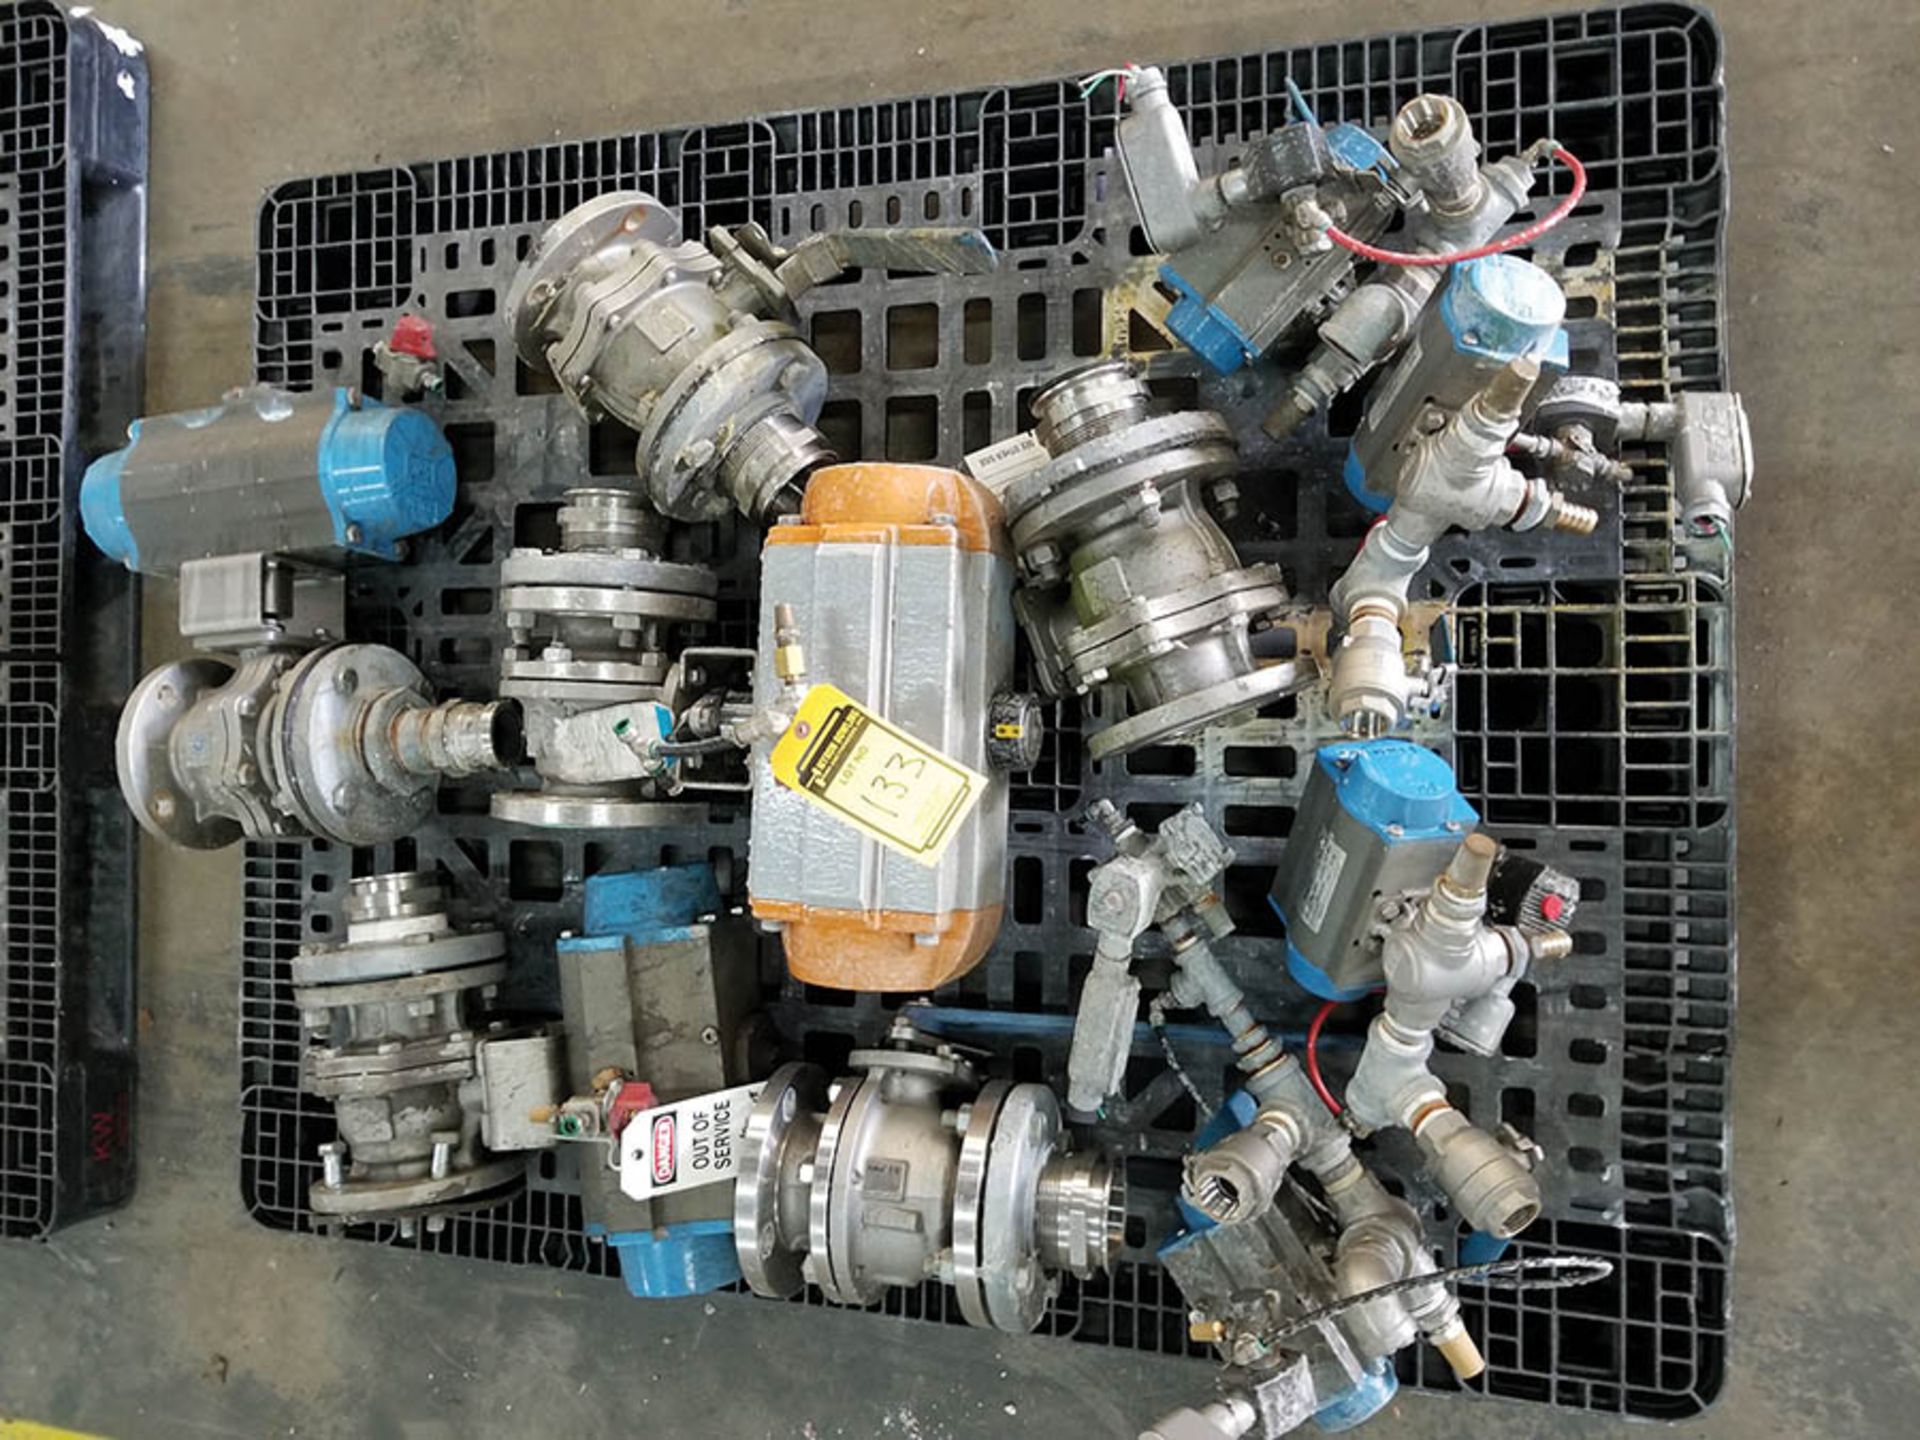 ACTUATOR VALVES & SHUT OFF VALVES, FORCE AND VALBIA MAKES